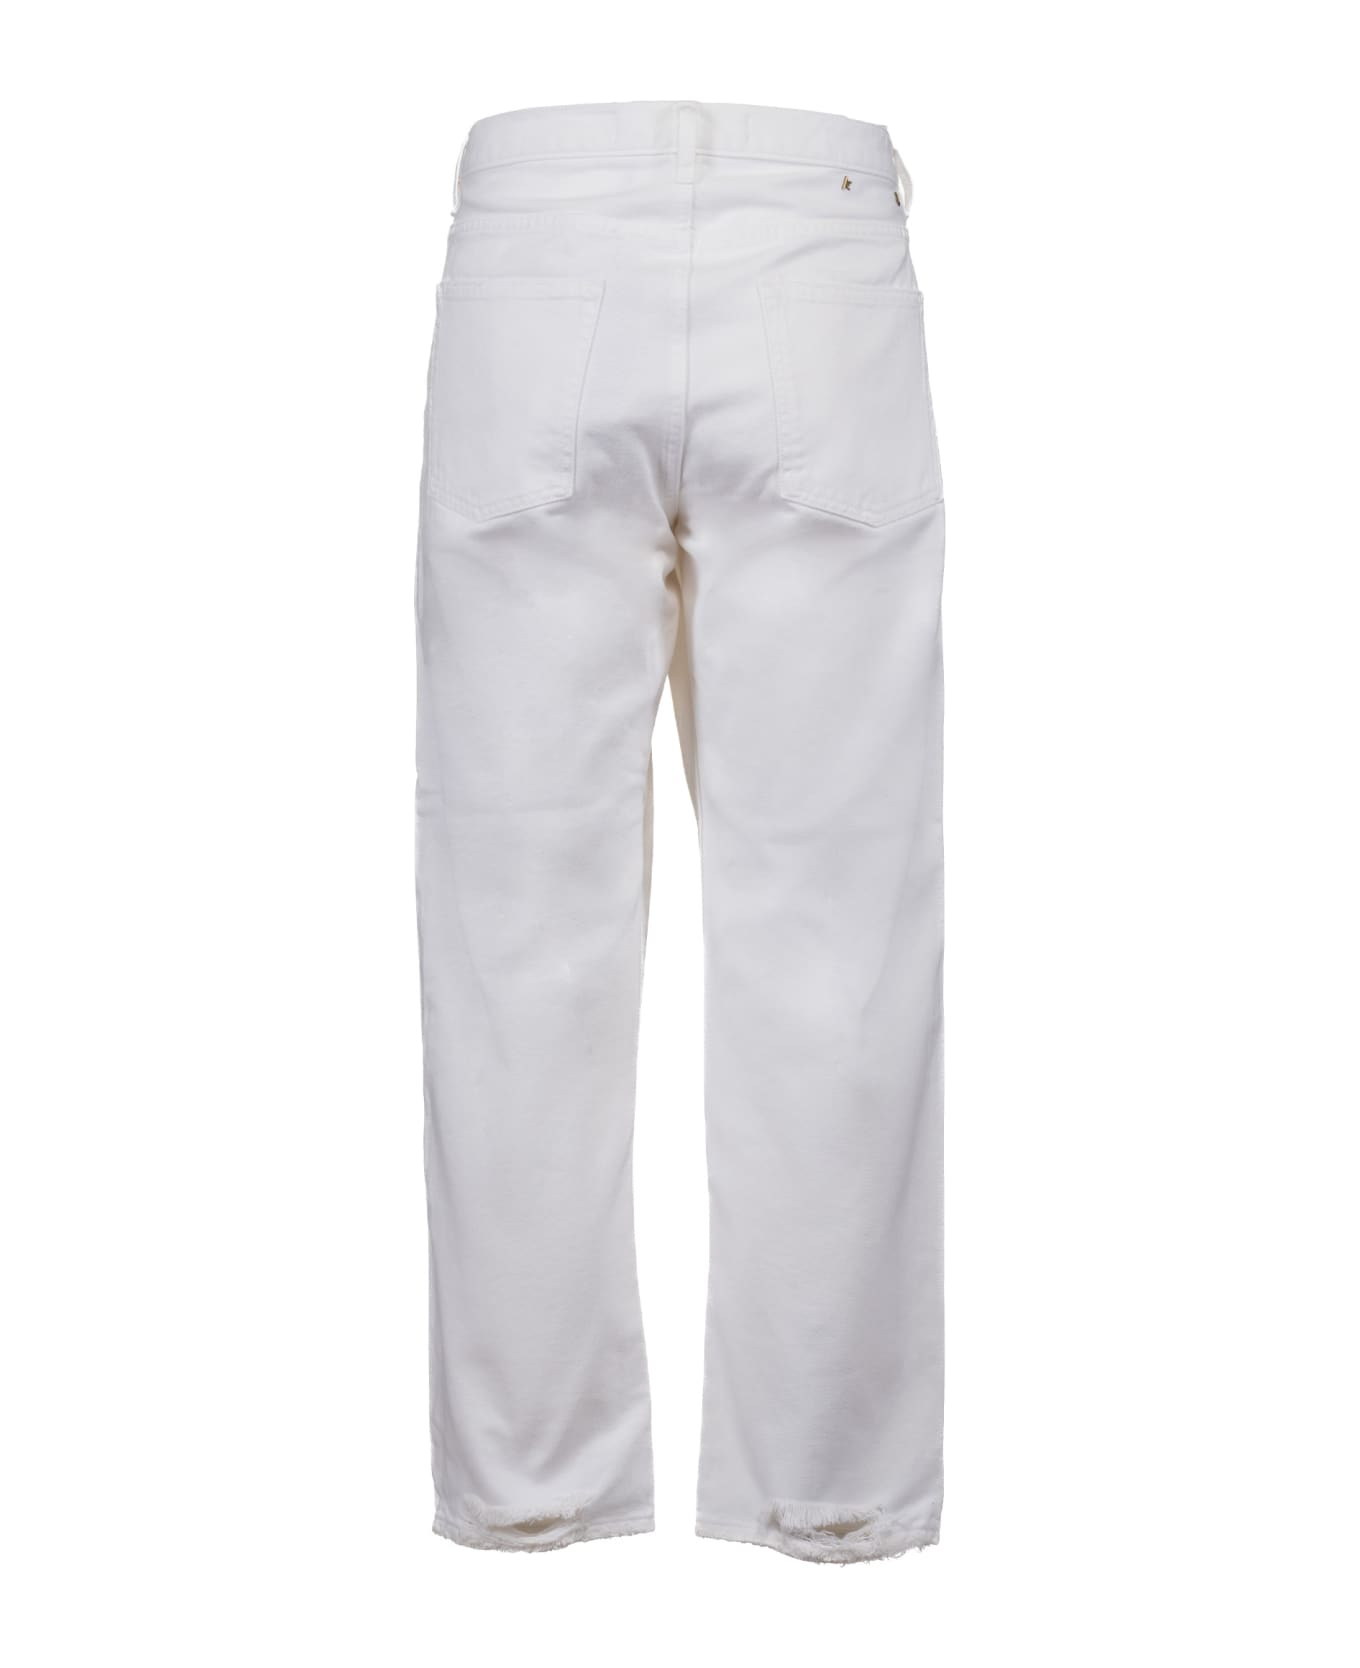 Golden Goose Cory Jeans - Bianco